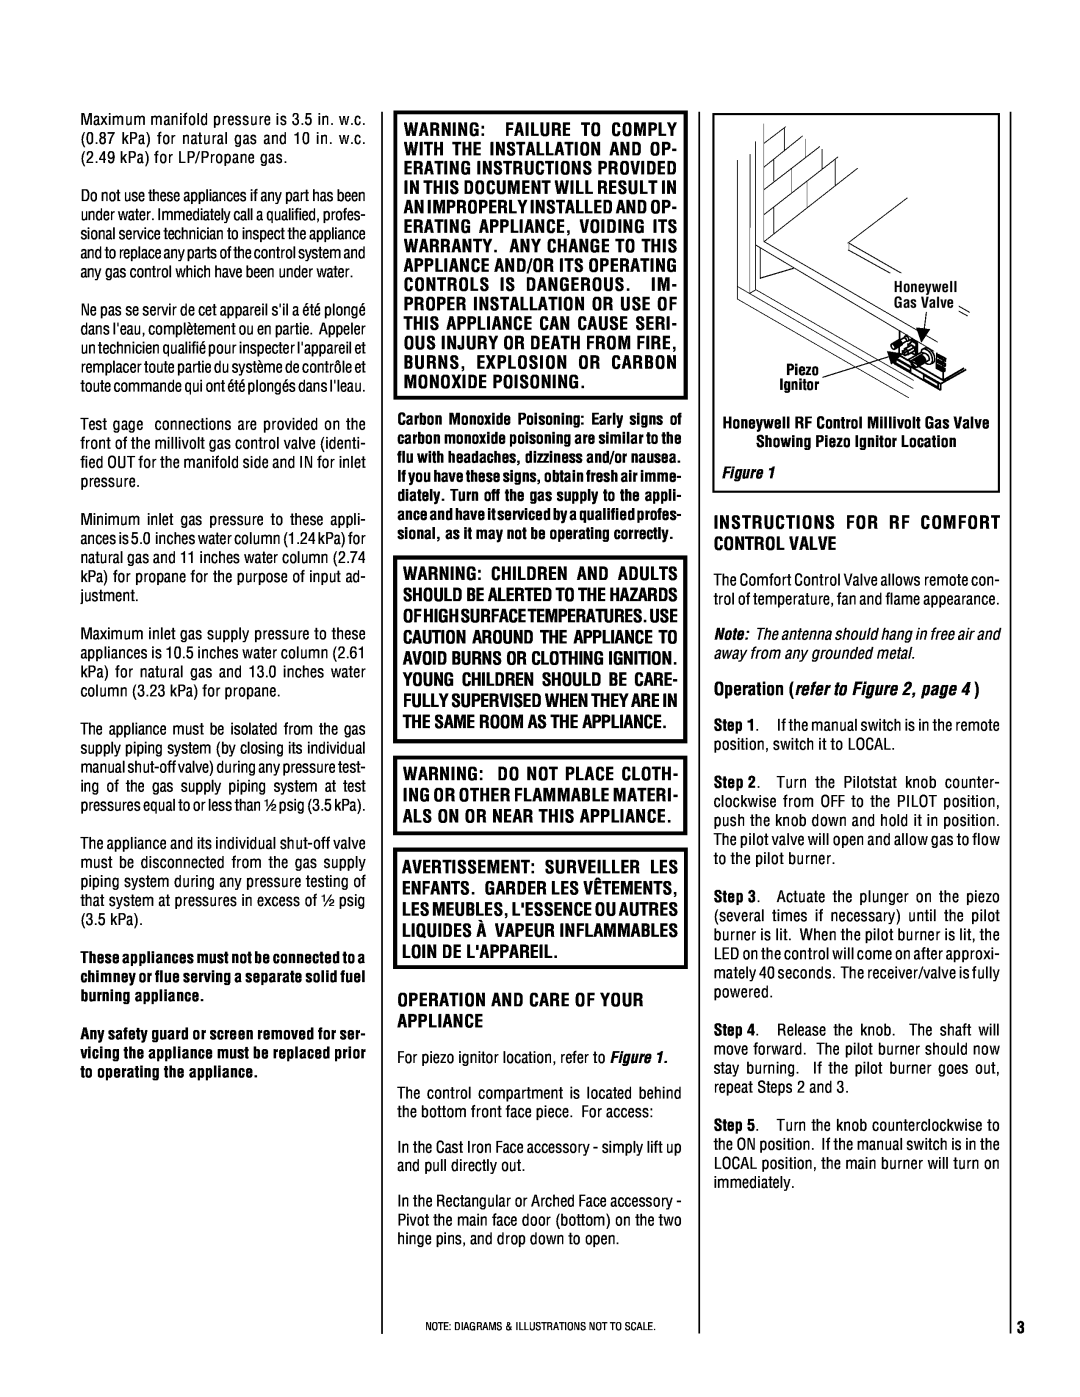 Magnavox LSS-40CP manual Operation And Care Of Your Appliance, Instructions For Rf Comfort Control Valve 